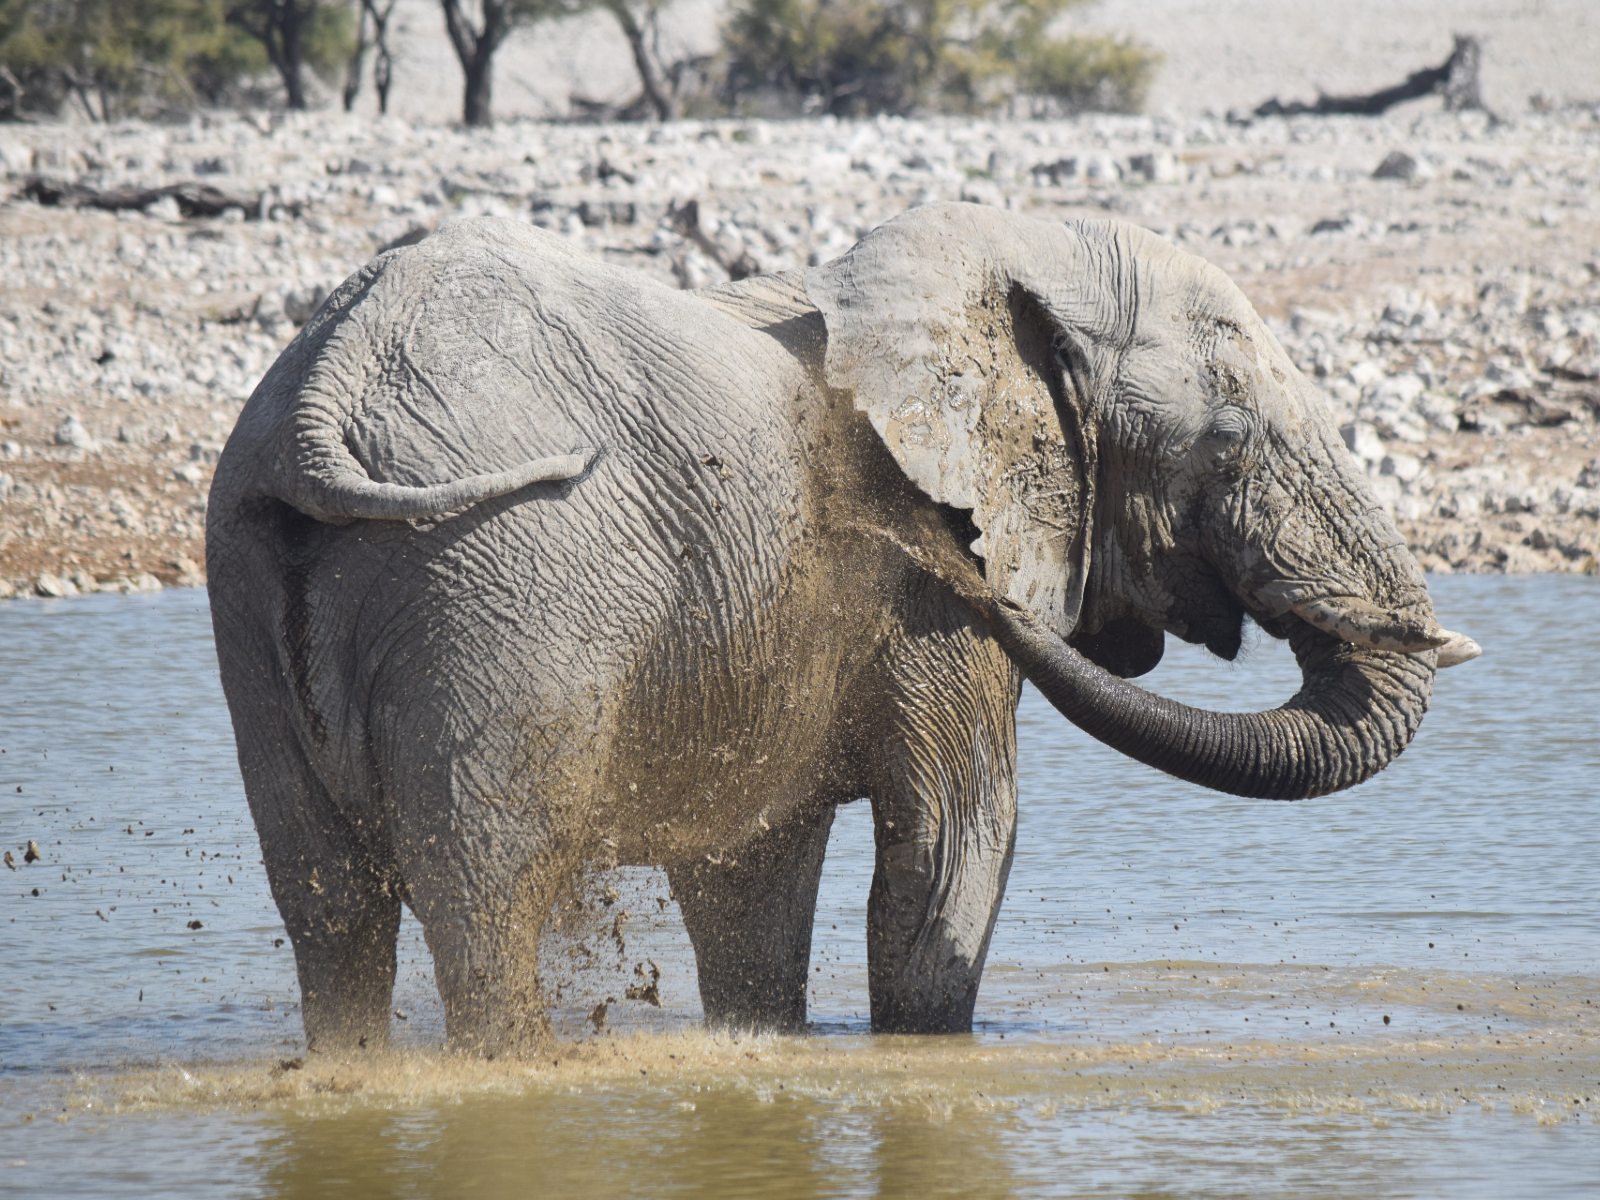 An elephant cooling itself with water.